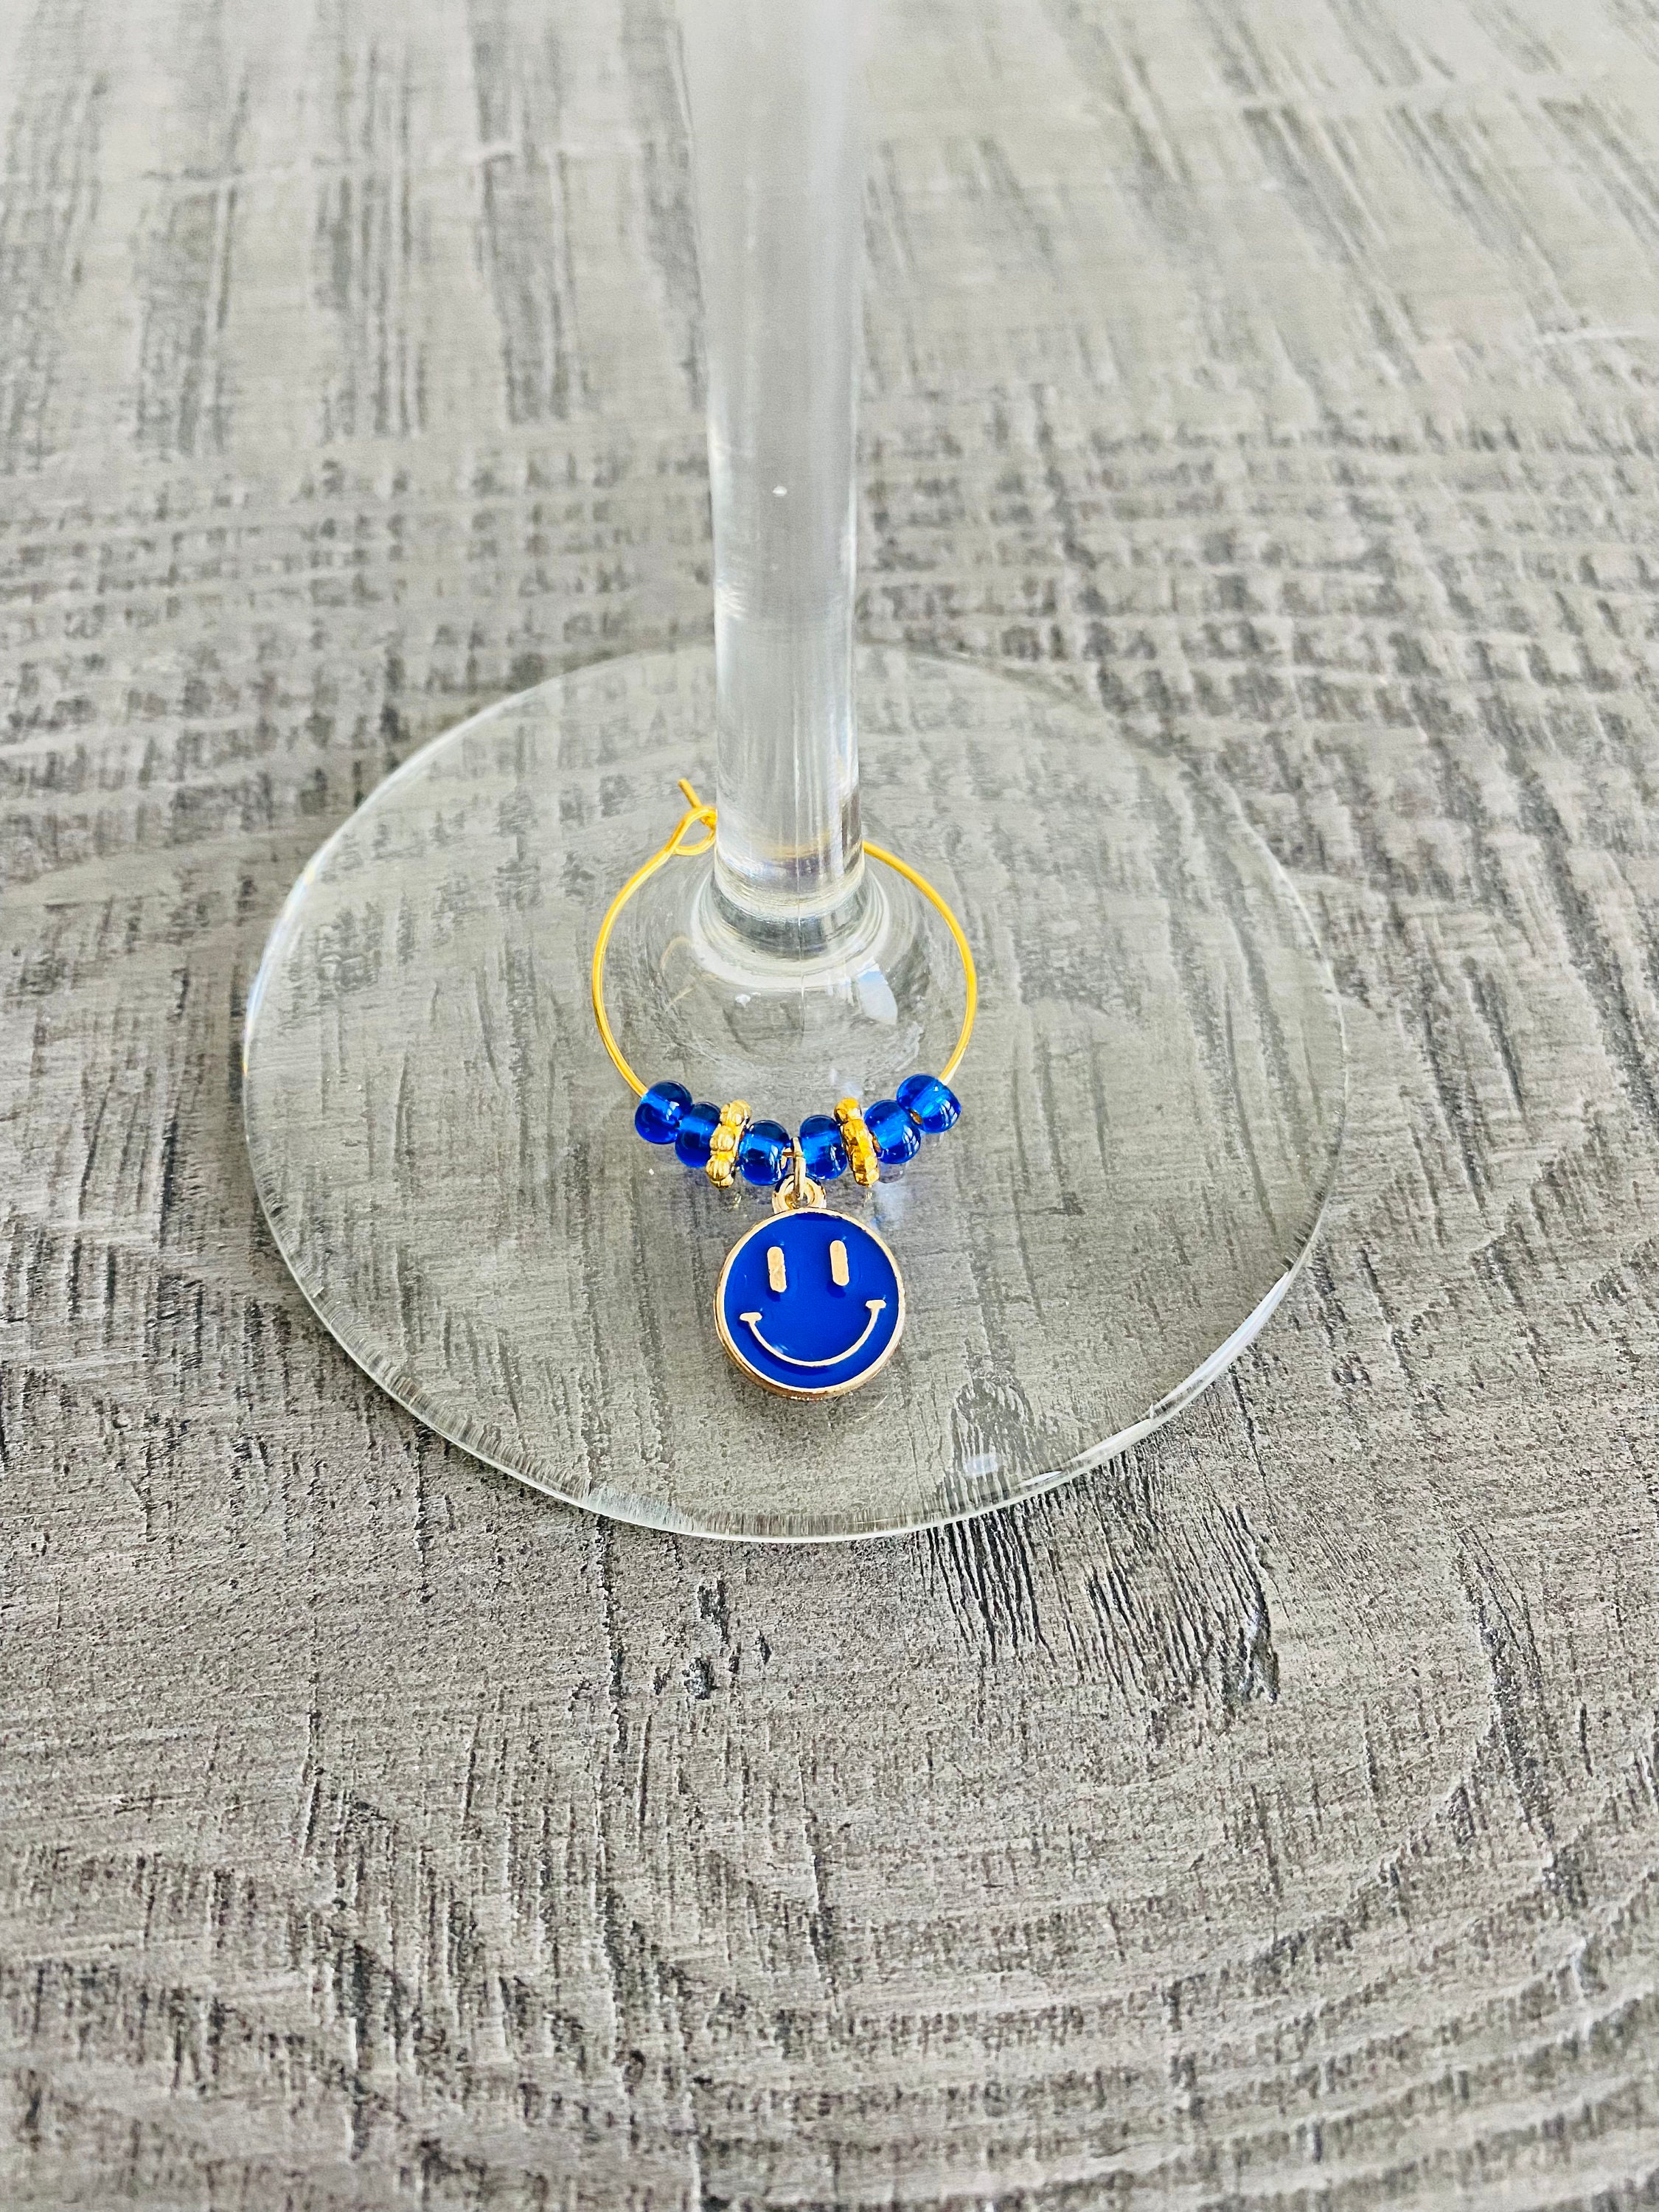 SALE !!! Fun people Smile faces 😊Wine Glass Charm Rings Set Of 6